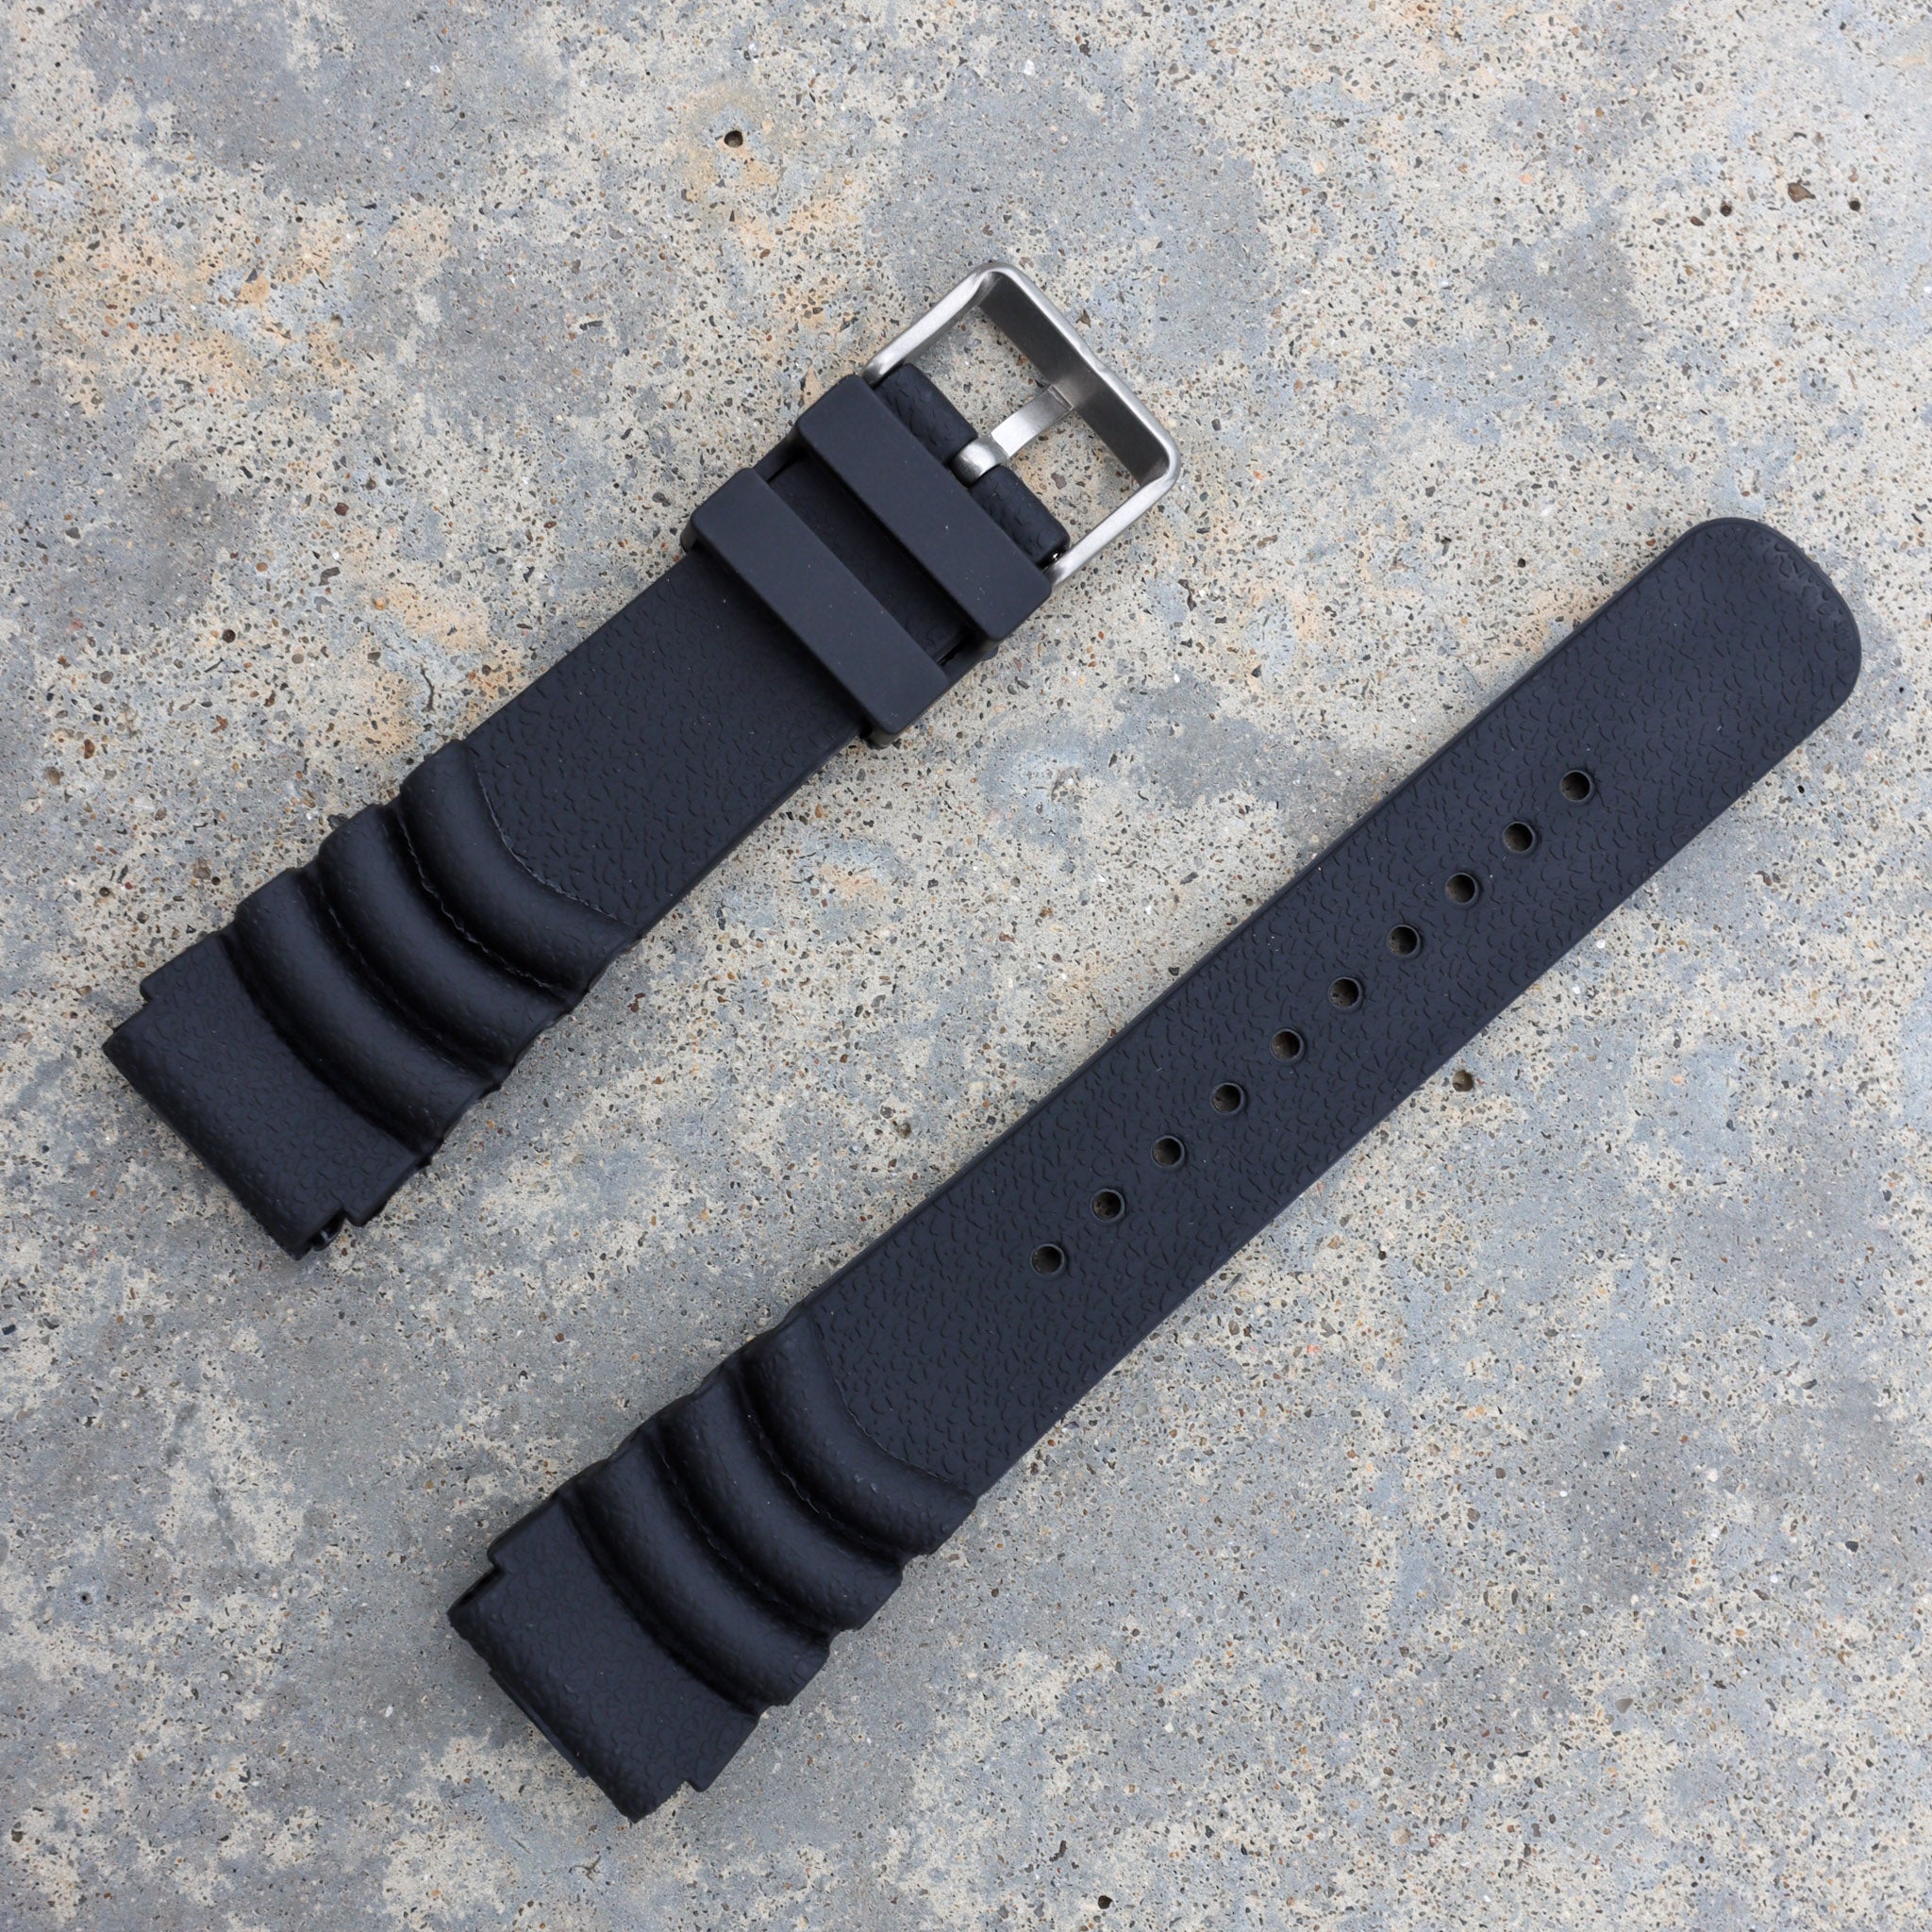 Black Rubber with diving extension | Flexi Rubber Series Watch Strap For Seiko - Samurai Vintage Co.